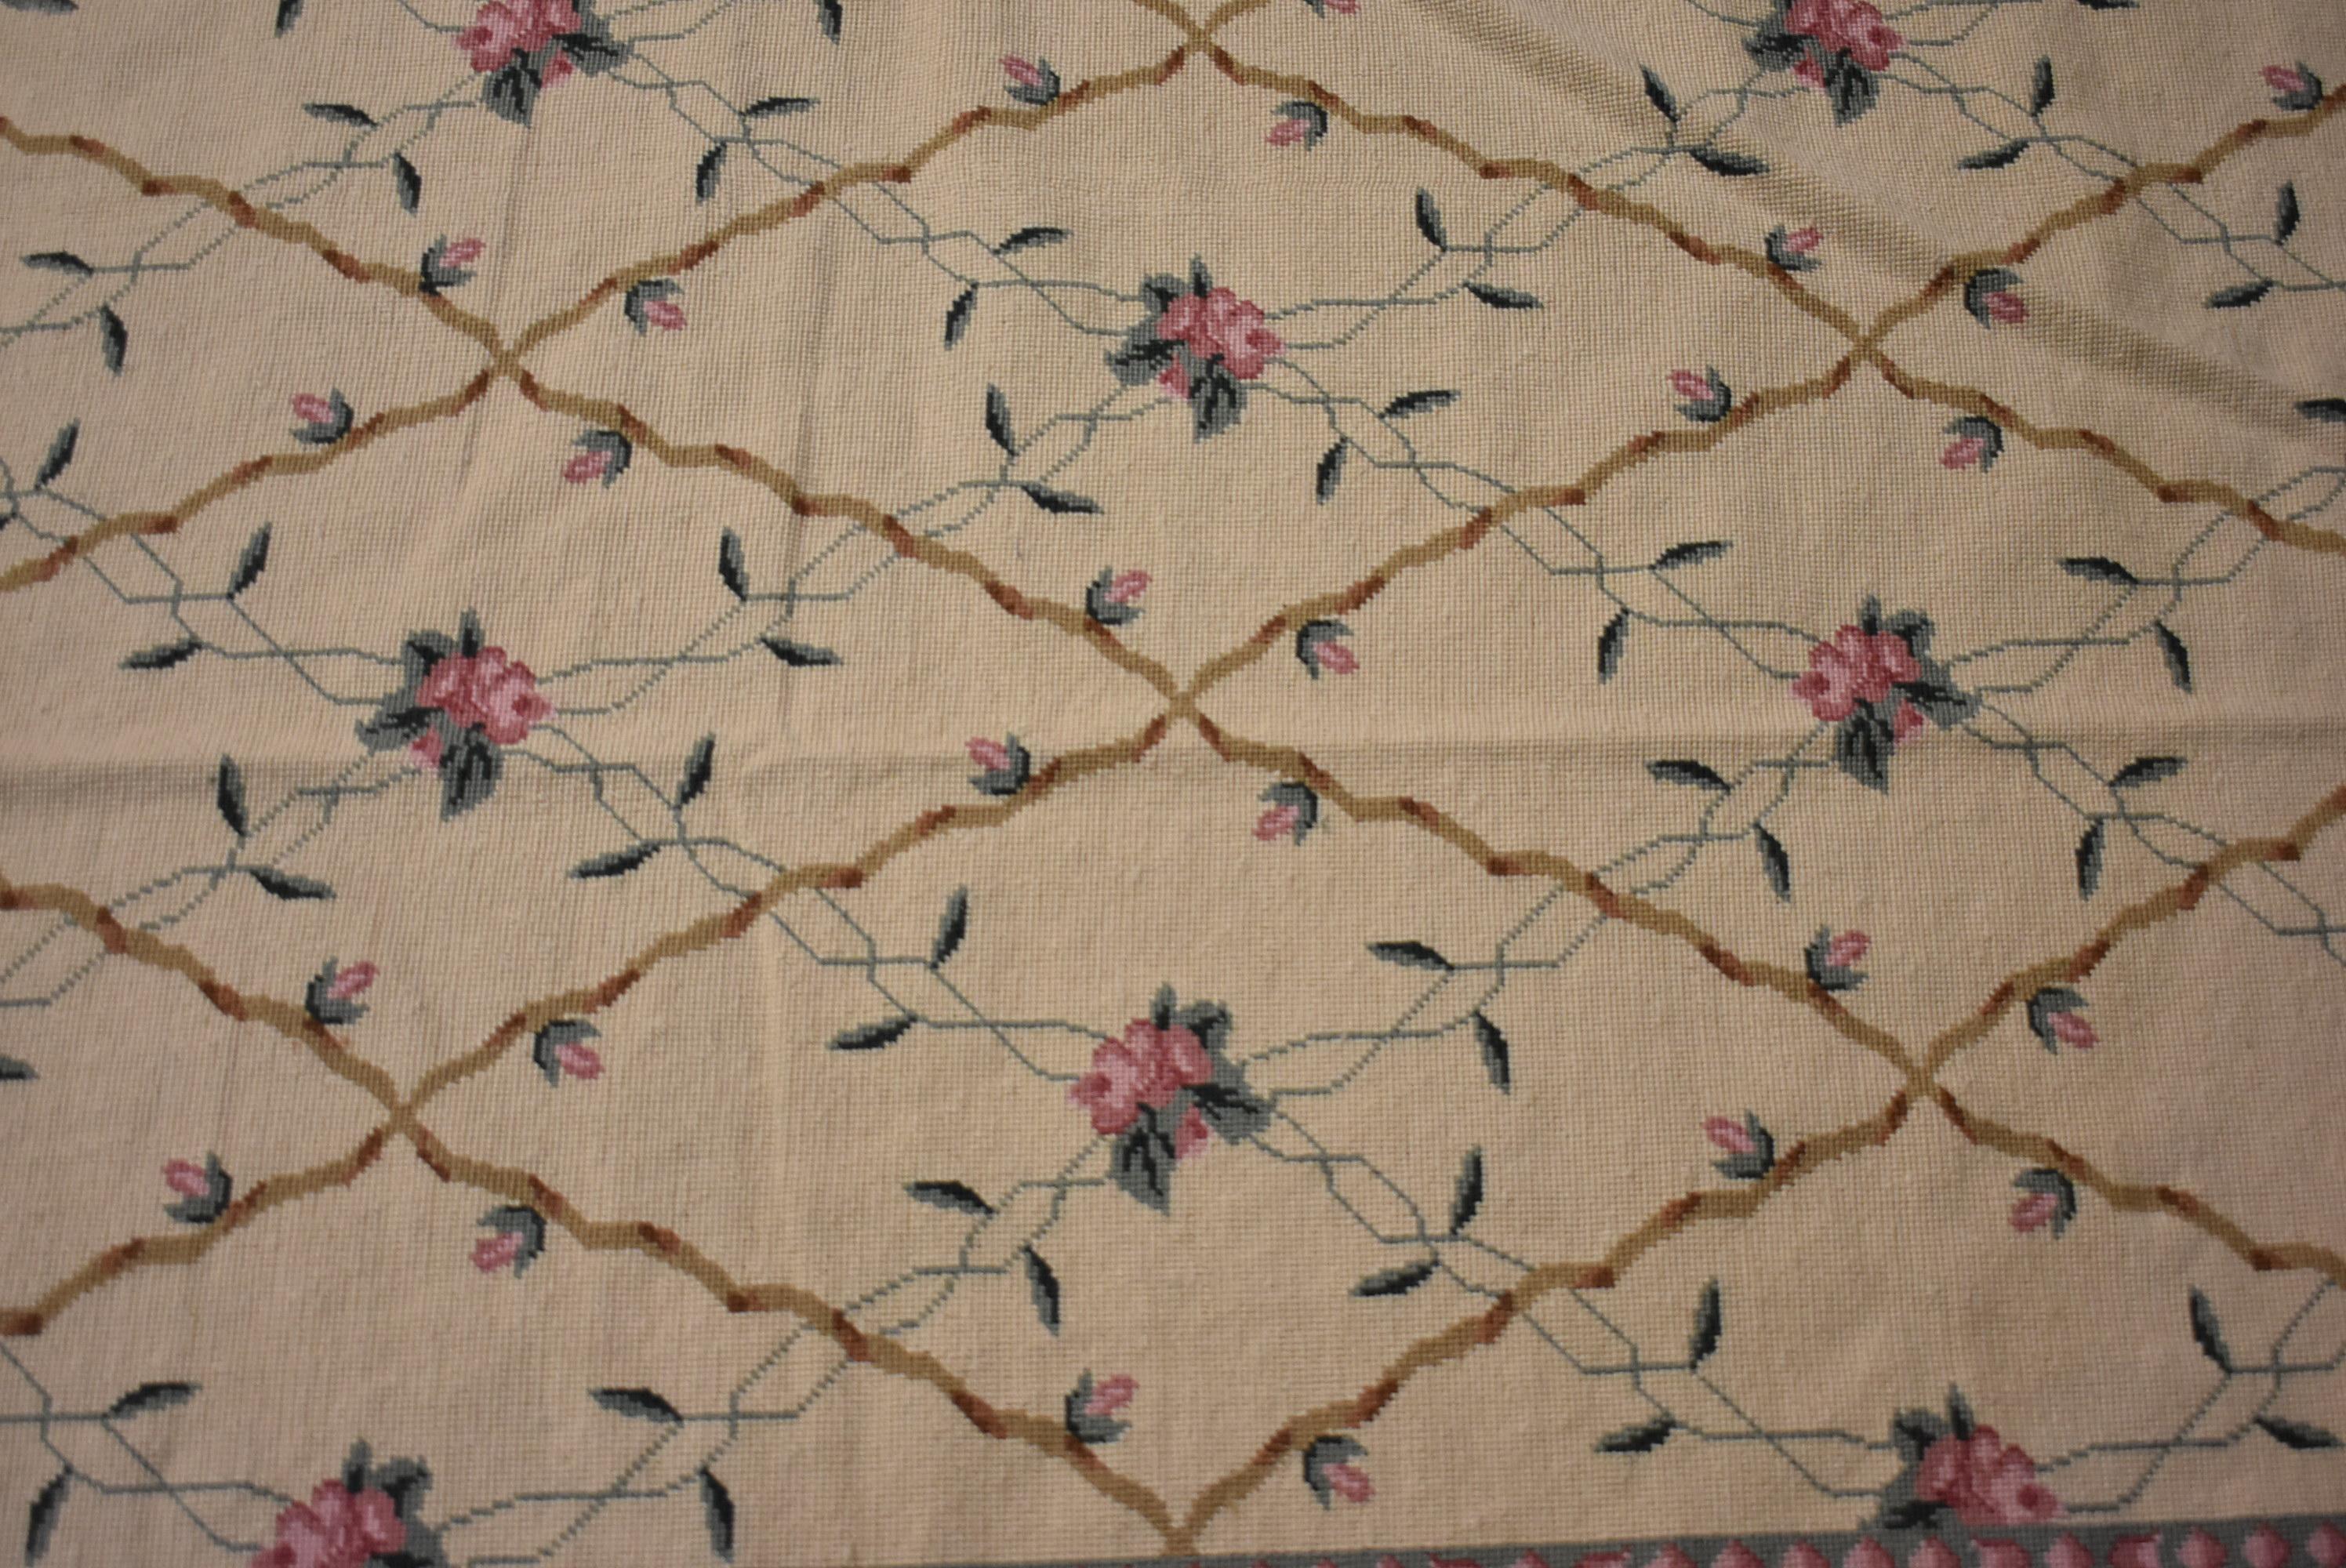 20th Century Floral Tapestry Rug Roses Lattice Aubusson, Beauvais Style, 8'6